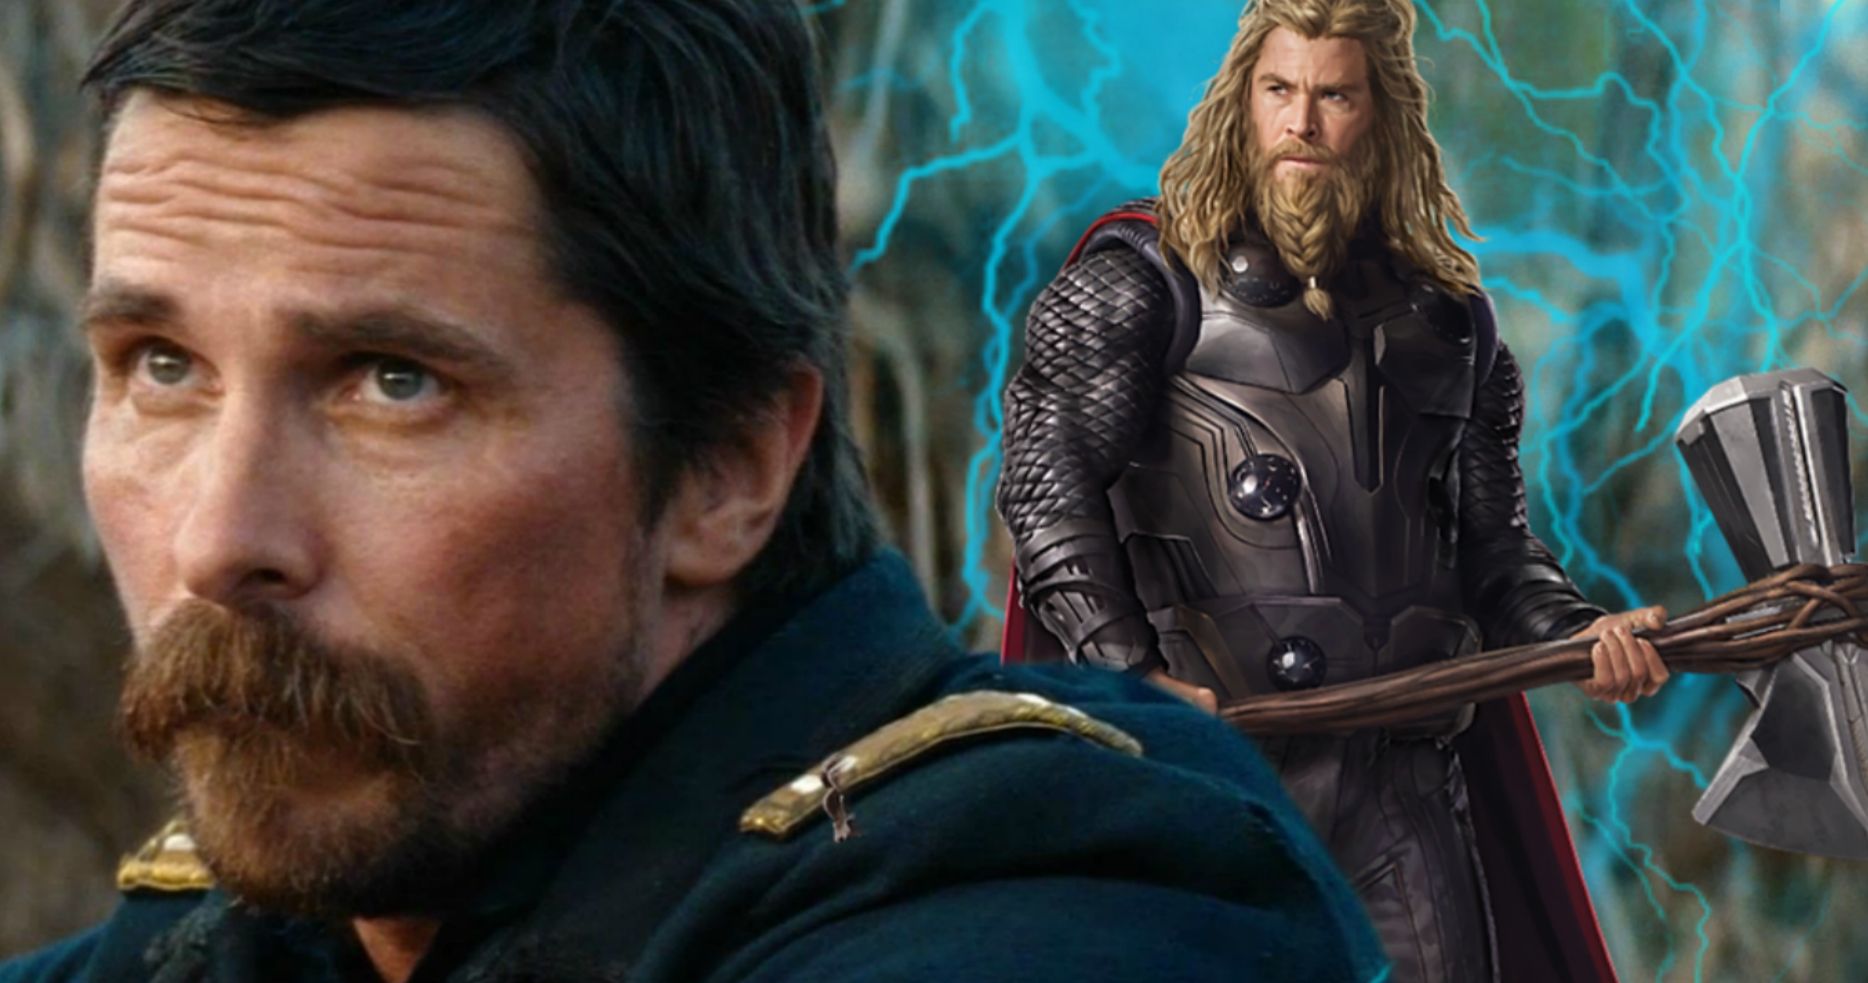 Christian Bale Is the Villain in Thor: Love and Thunder